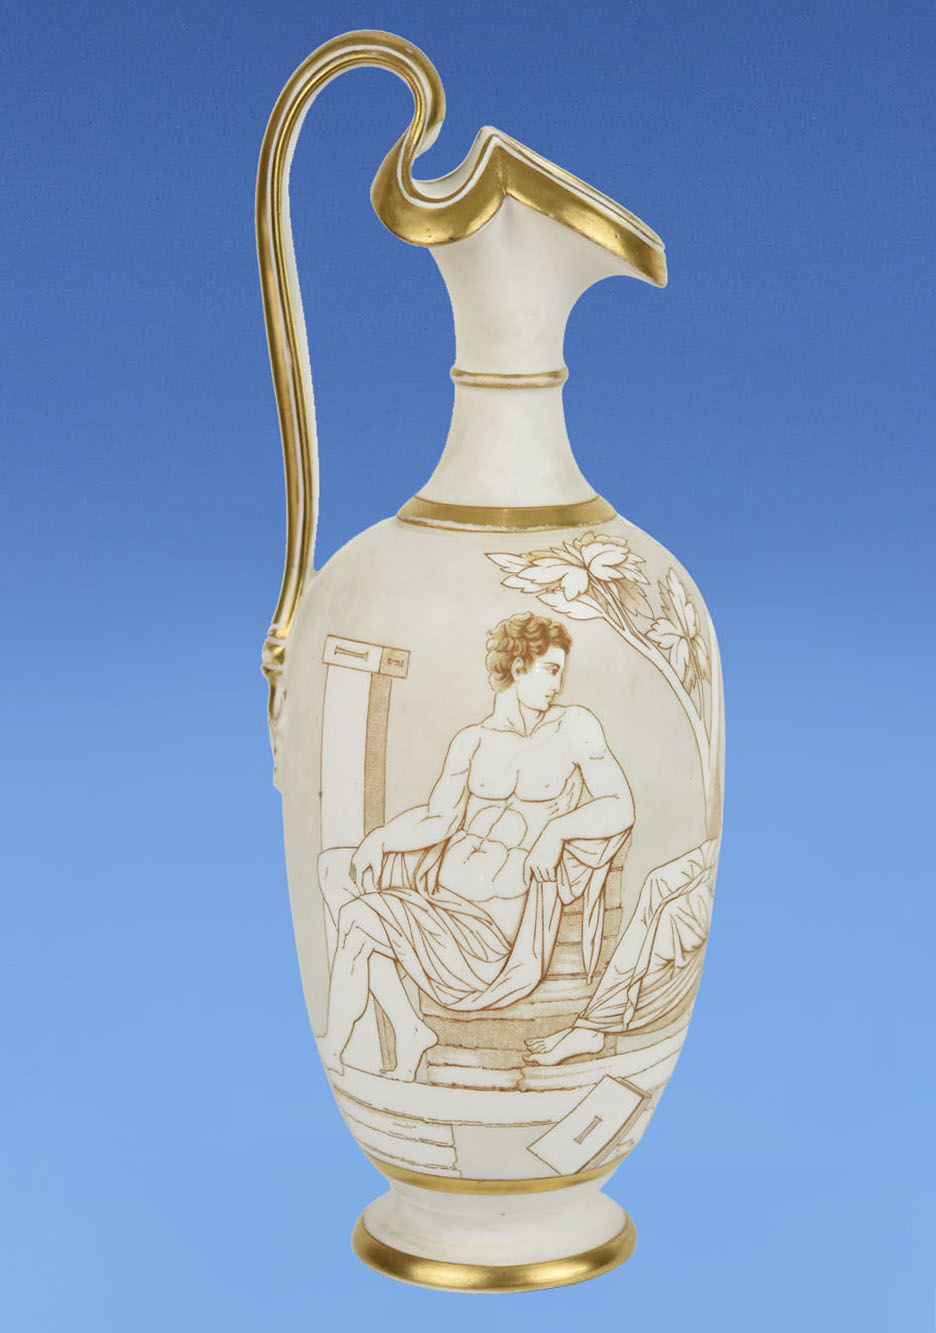 Hill Pottery Co. Porcelain Neo Classical Ewer c.1865 depicting Mortality